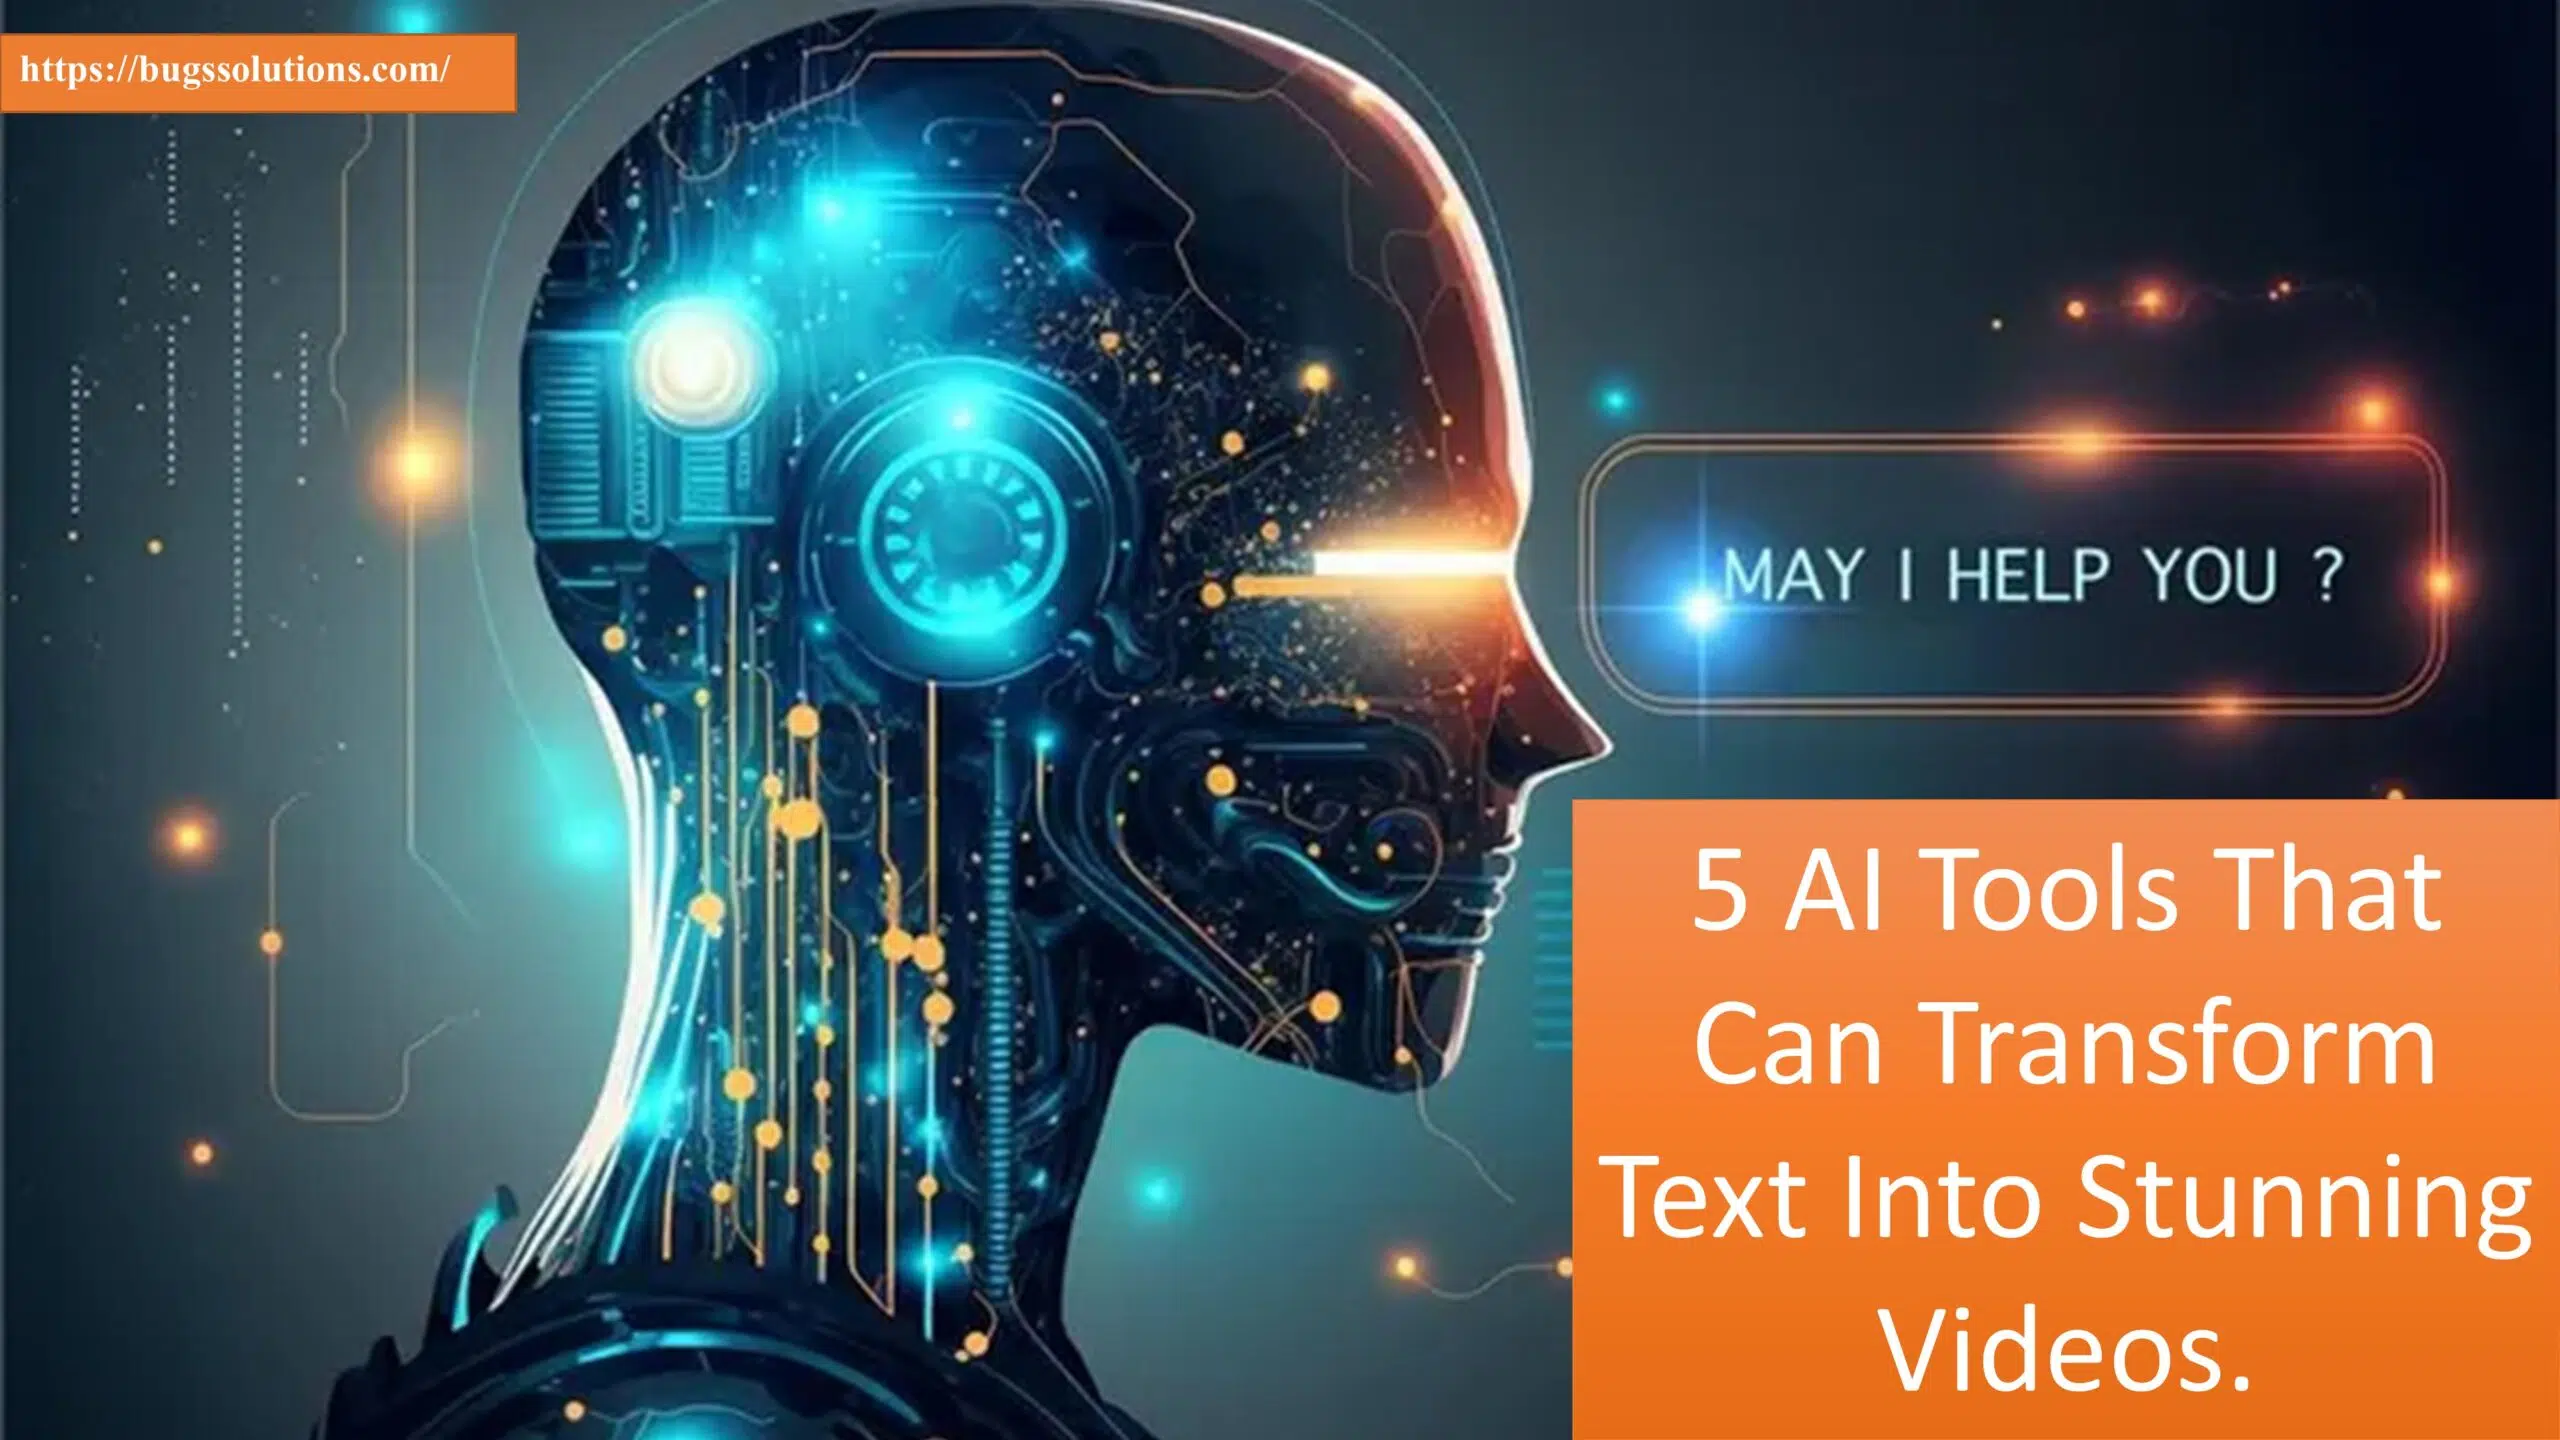 5 AI Tools That Can Transform Text Into Stunning Videos.